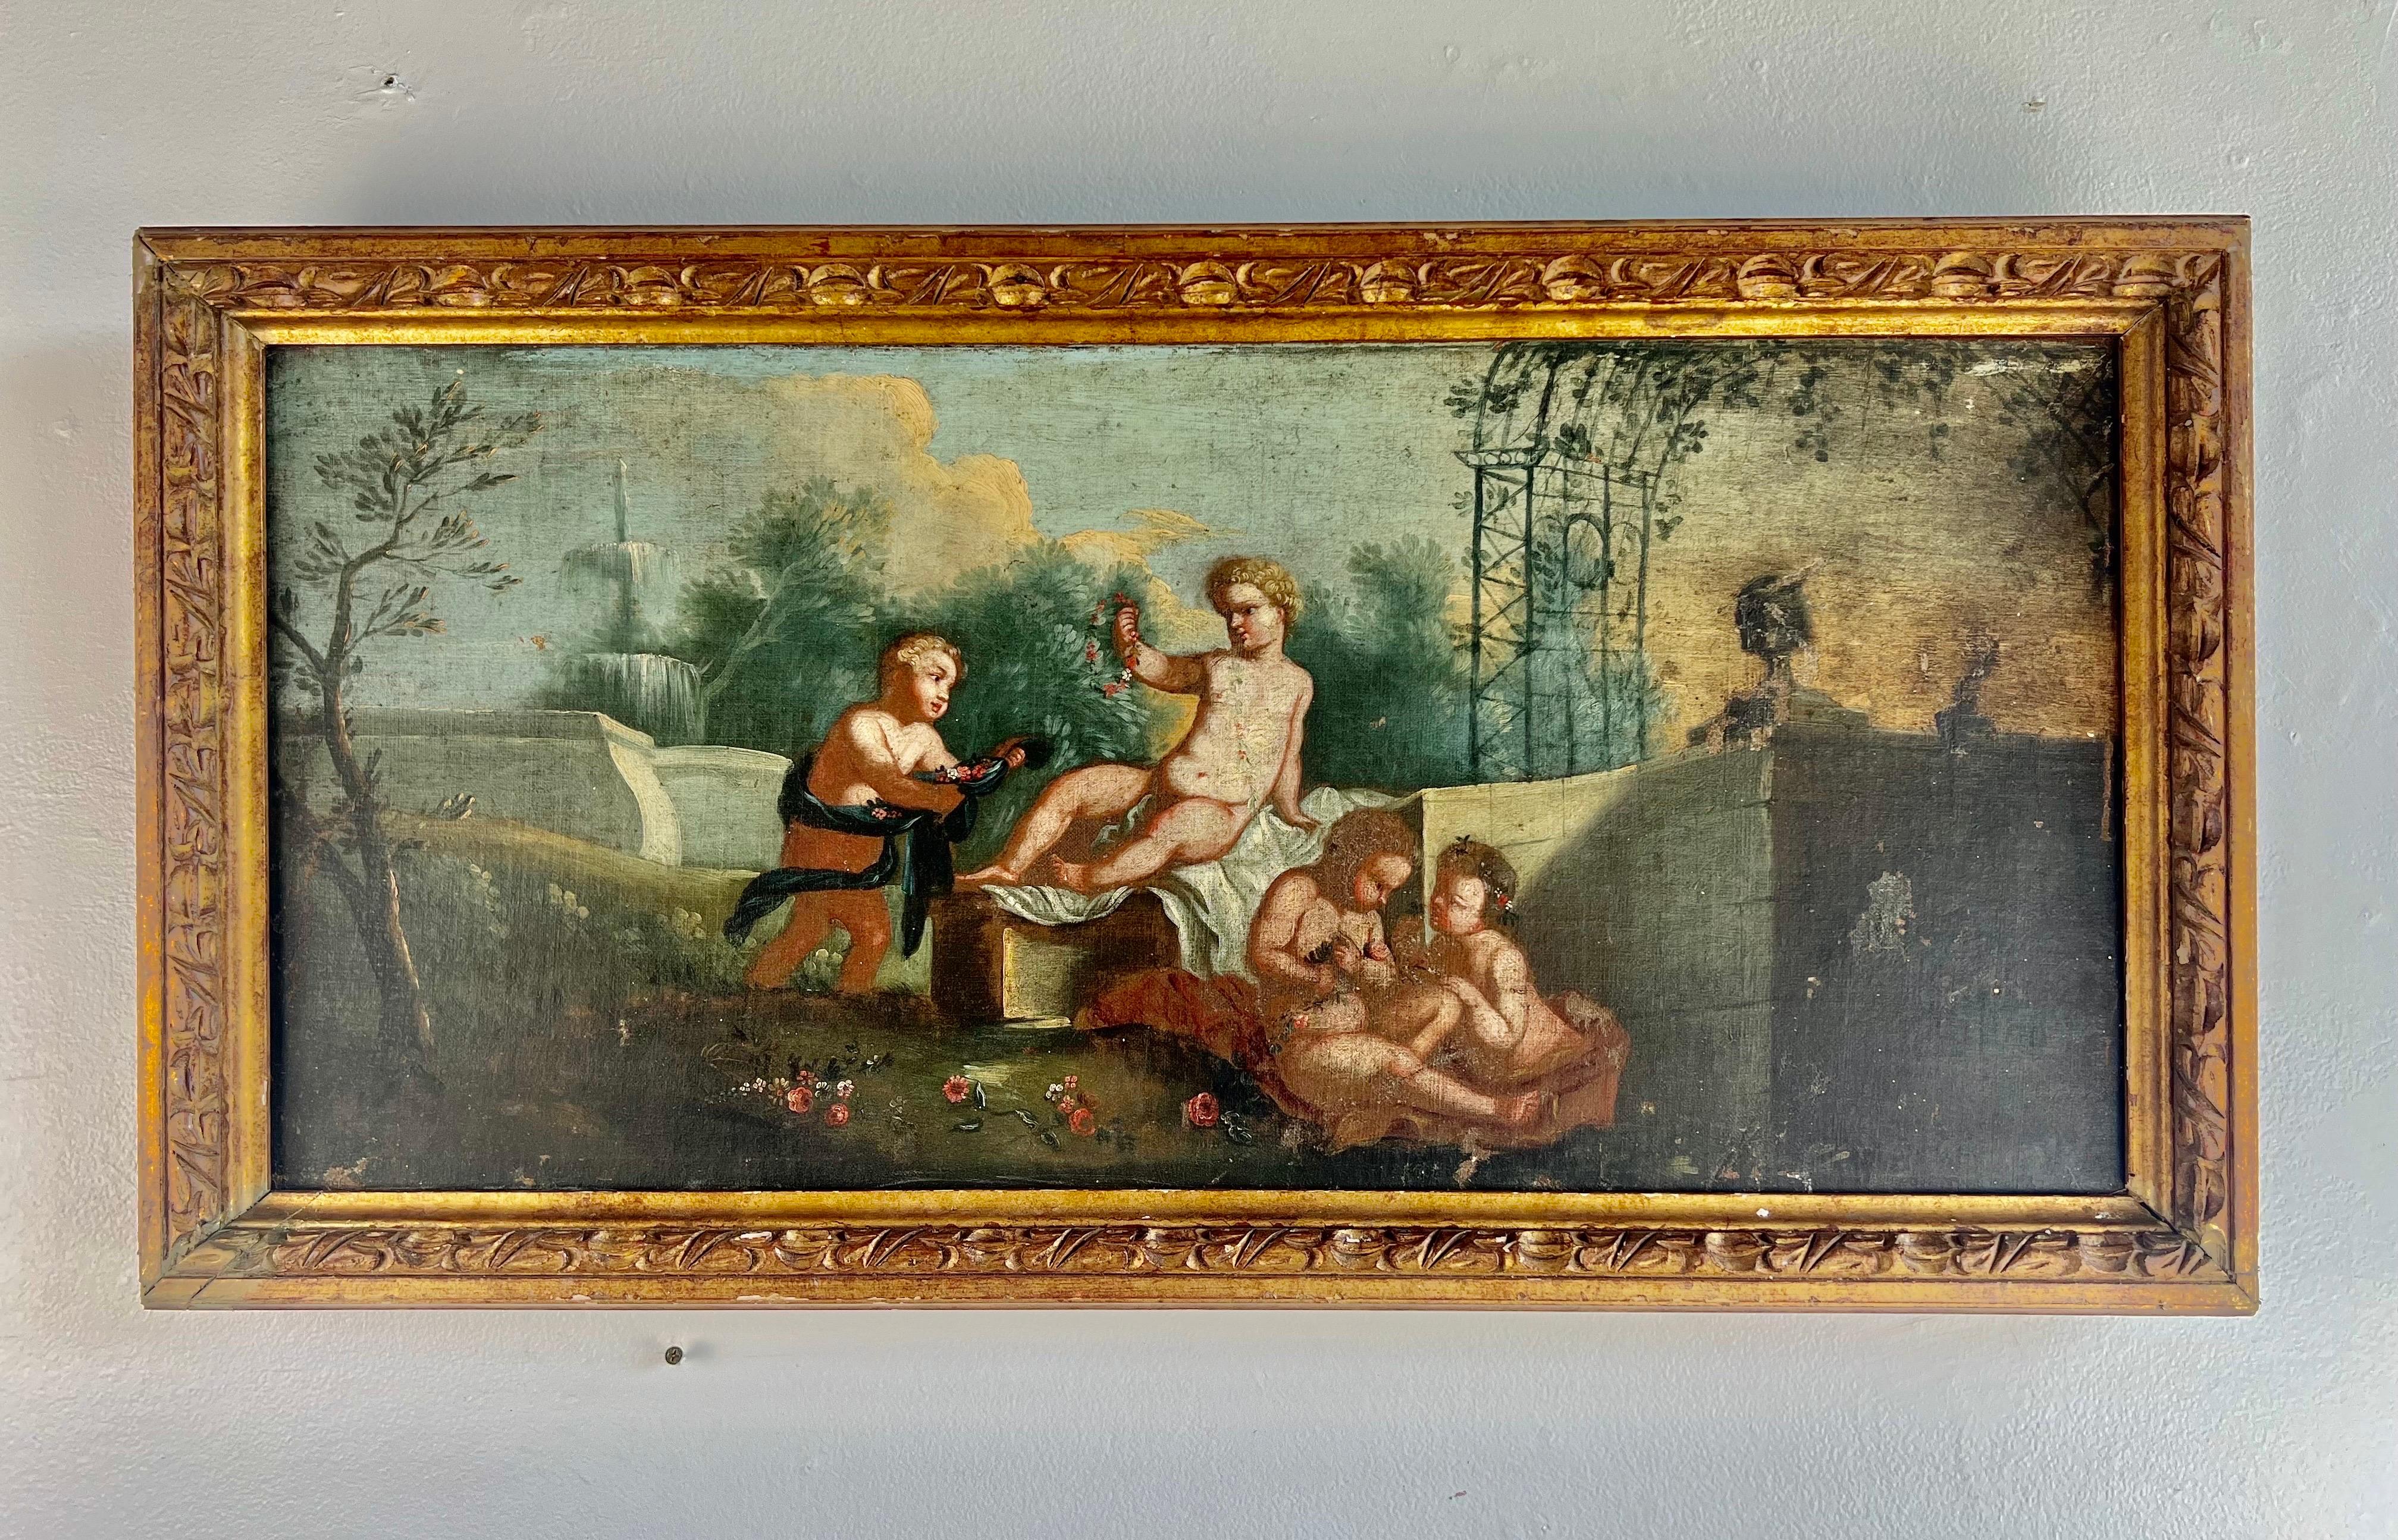 19th C. Original Oil on Canvas depicting a group of cherubs making flower garlands.  It is charming and whimsical.  The detail is intricate.  It has been relined and a has had a gilt wood frame added.